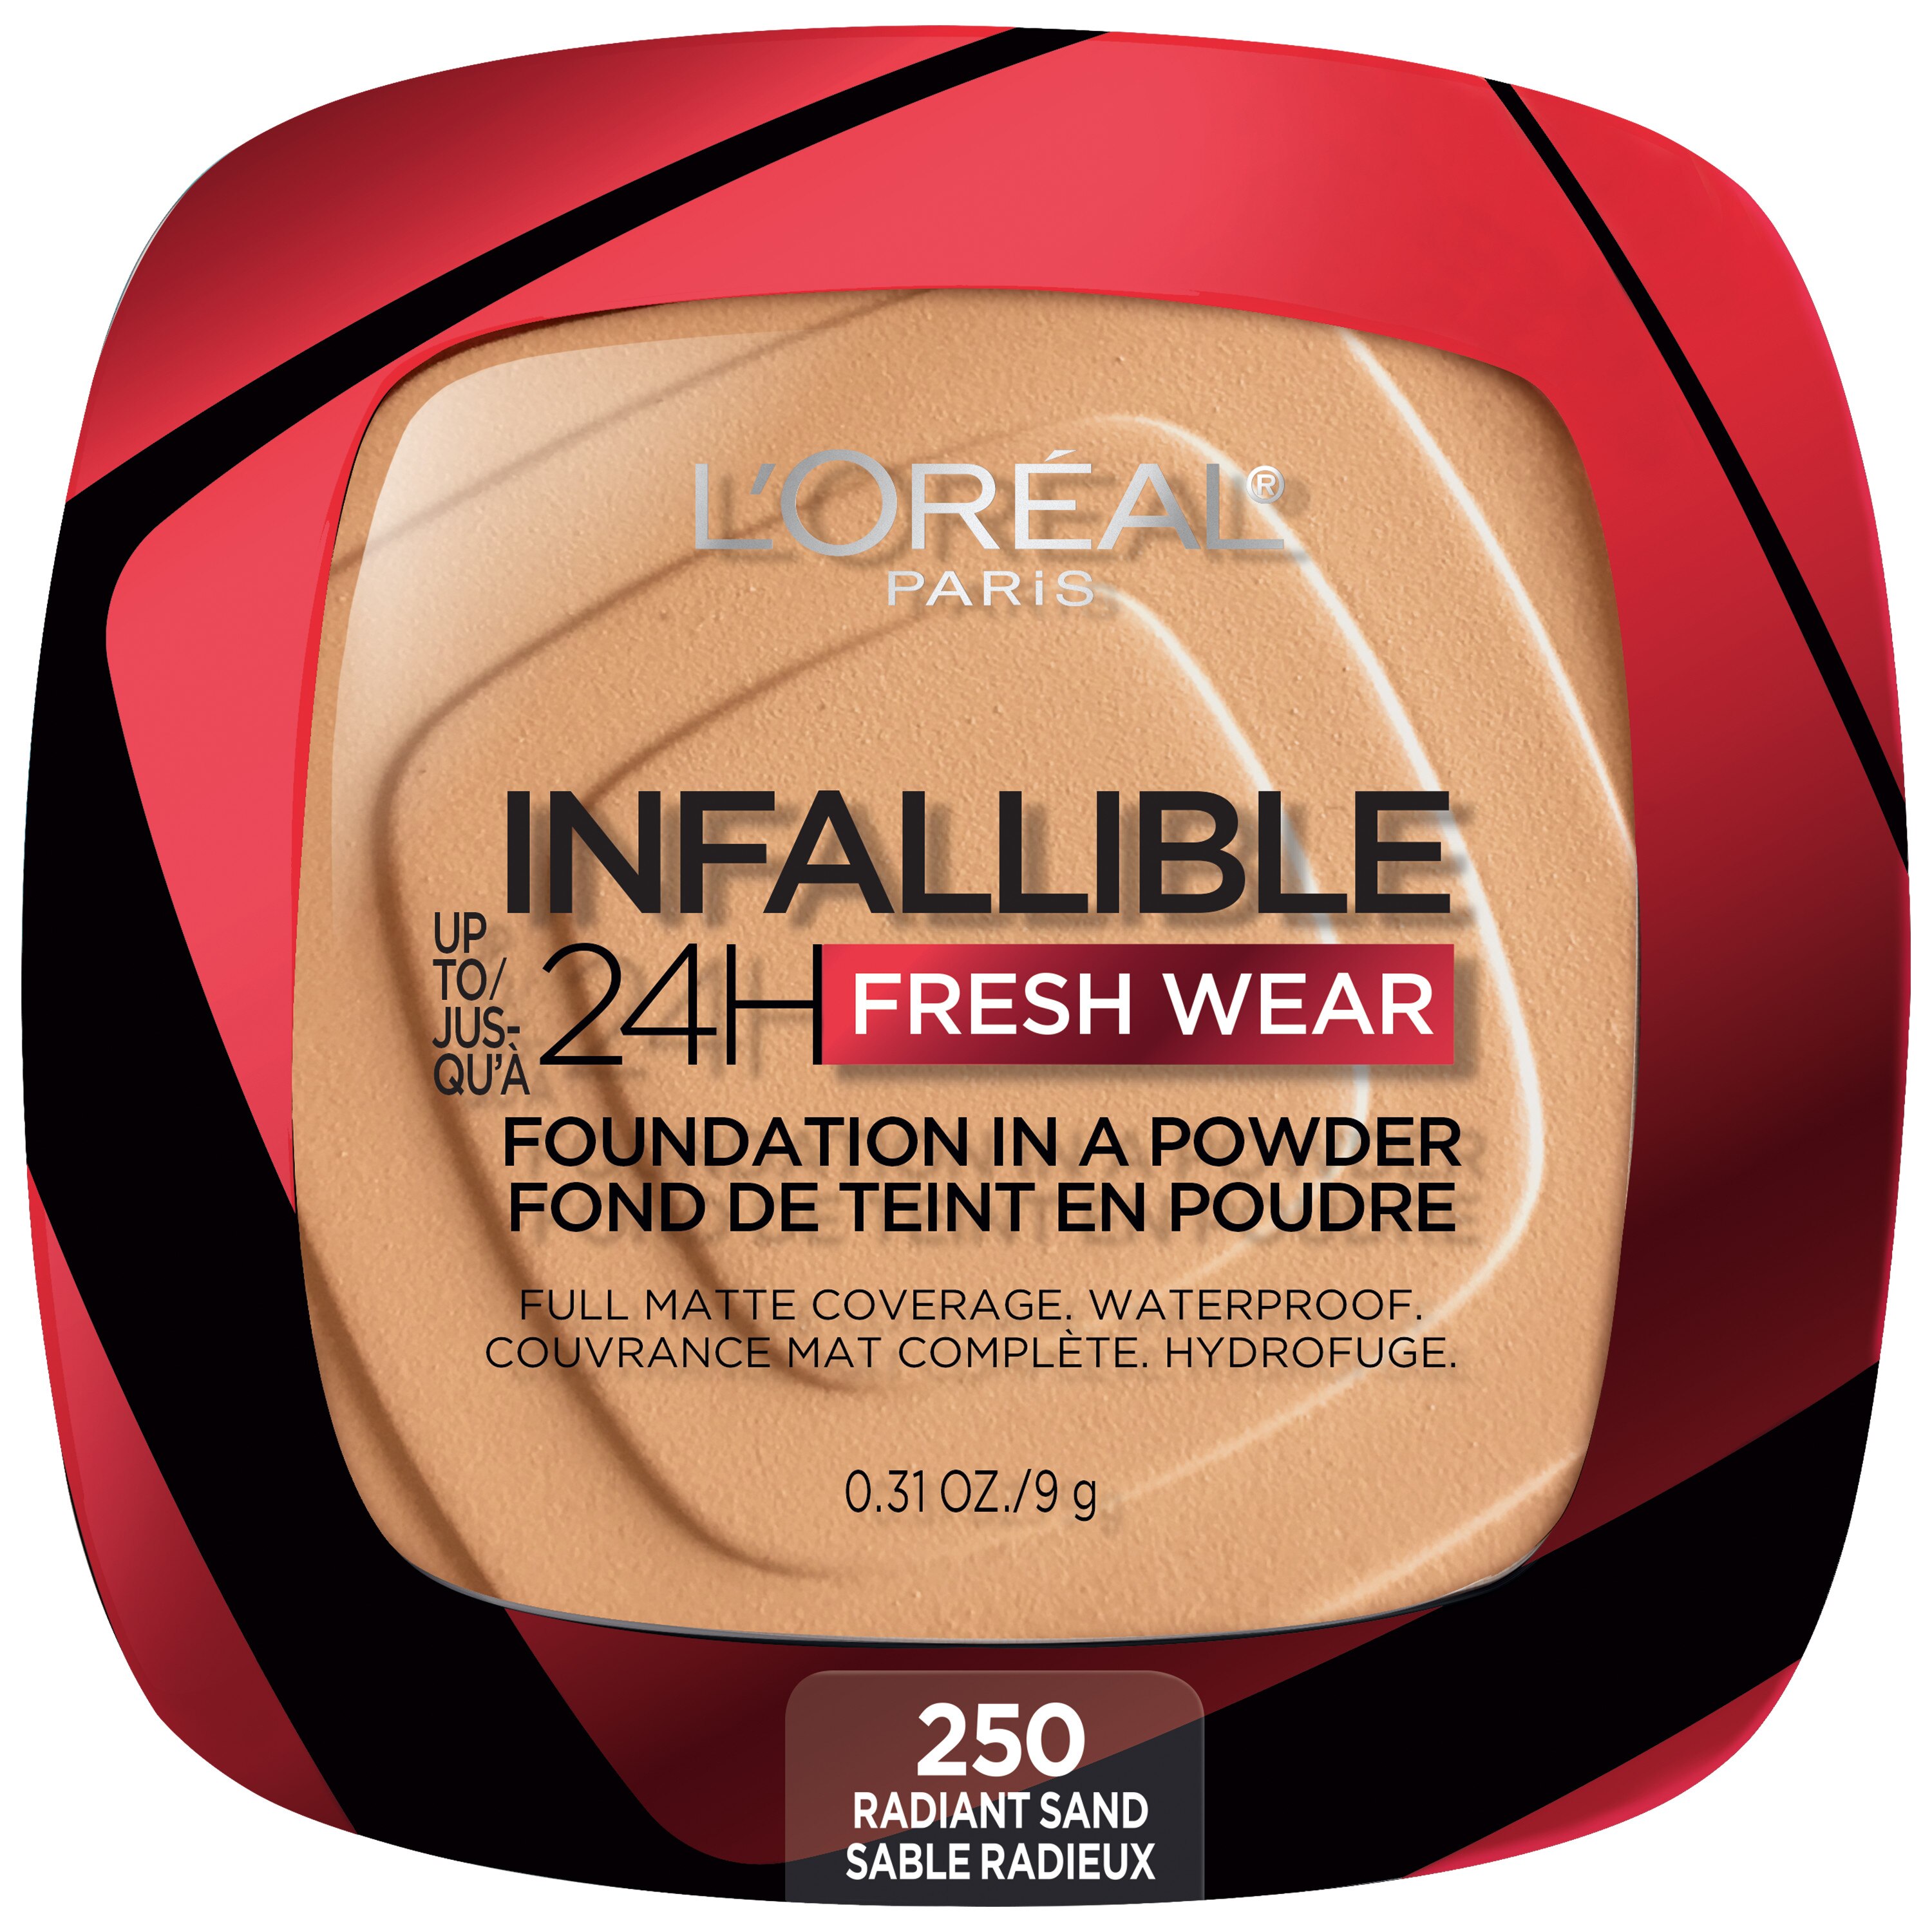 L'Oreal Paris Infallible Up To 24H Fresh Wear In A Powder, Matte Finish, Radiant Sand - 0.31 Oz , CVS